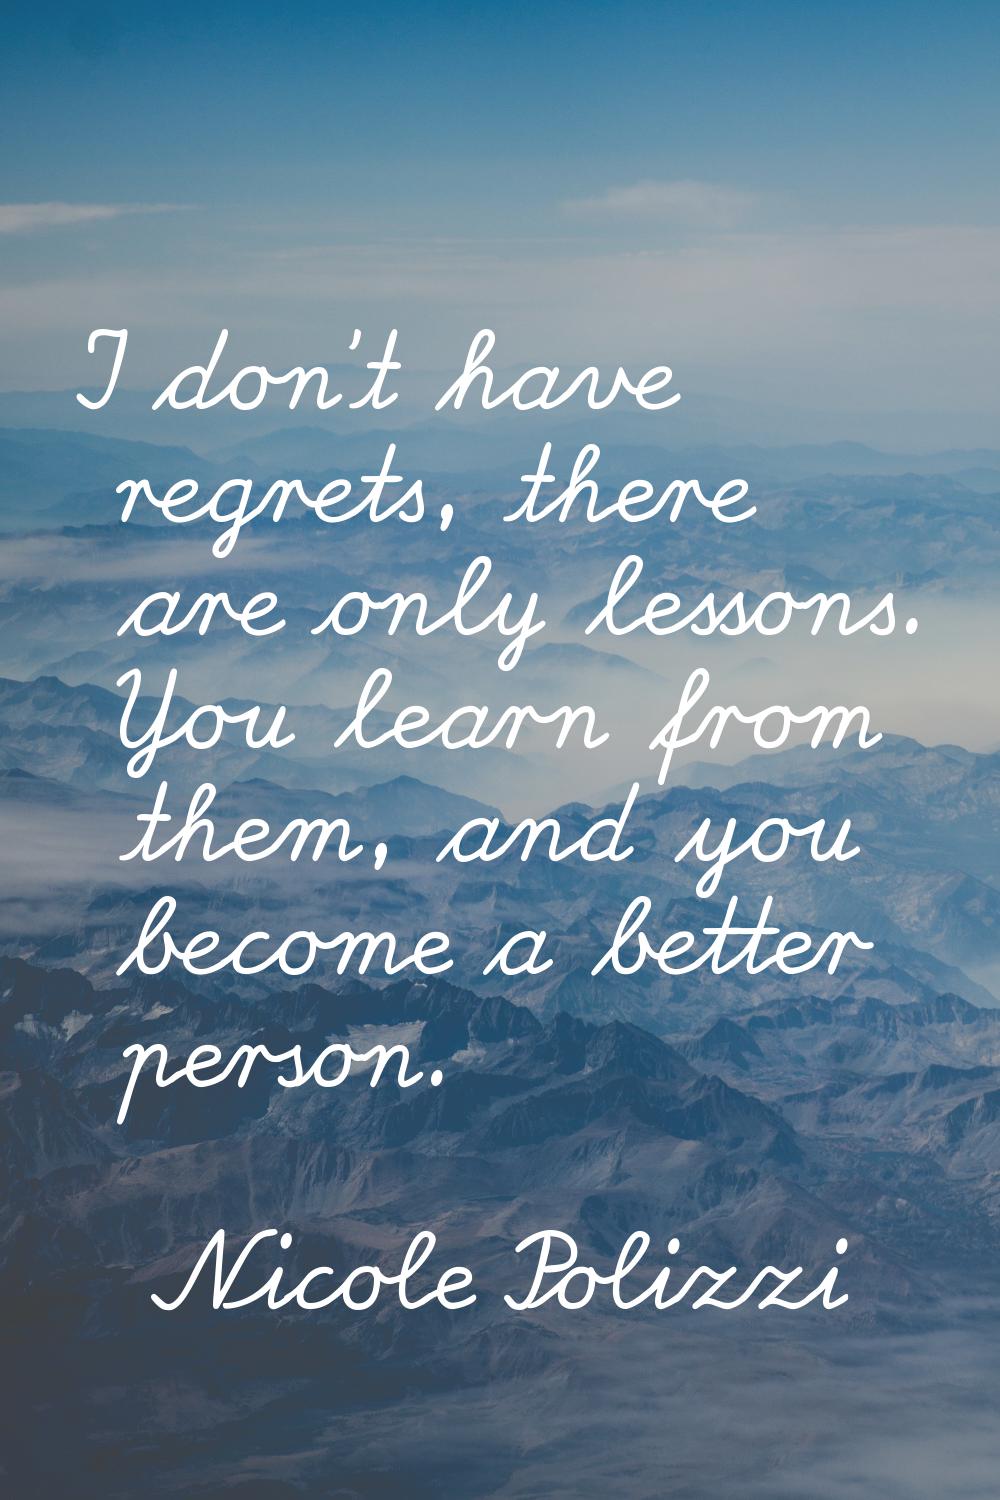 I don't have regrets, there are only lessons. You learn from them, and you become a better person.